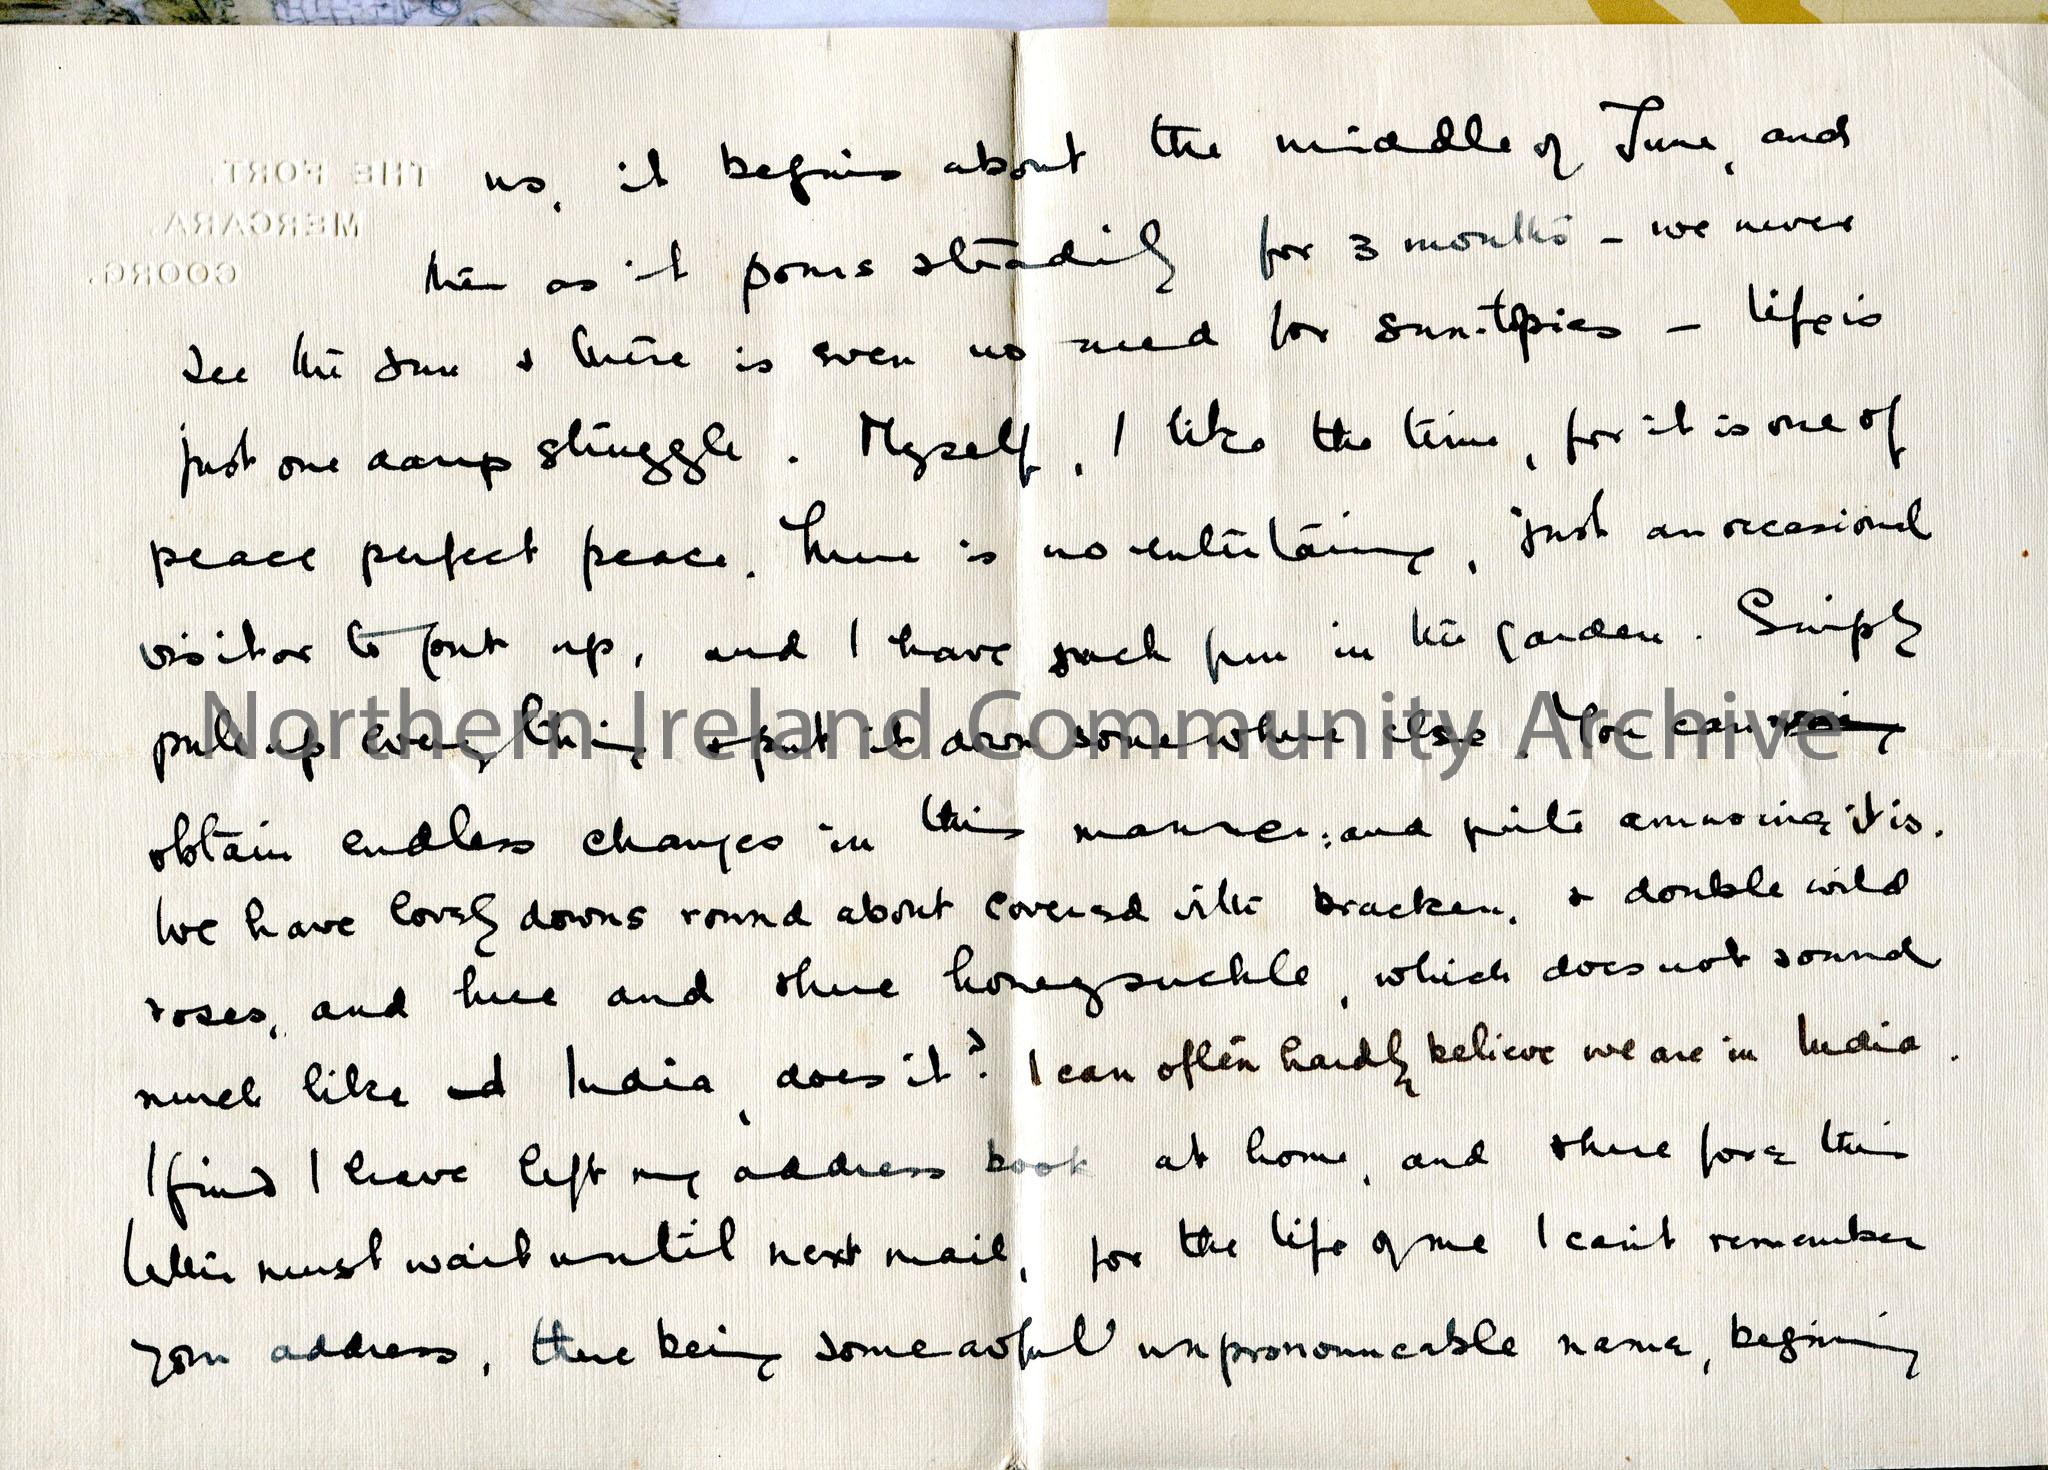 One of 2 double pages of handwritten letter, covering all sides. Writes from India. Talks of: thanks for sympathy [does not name who has died]; stayin… – img002b